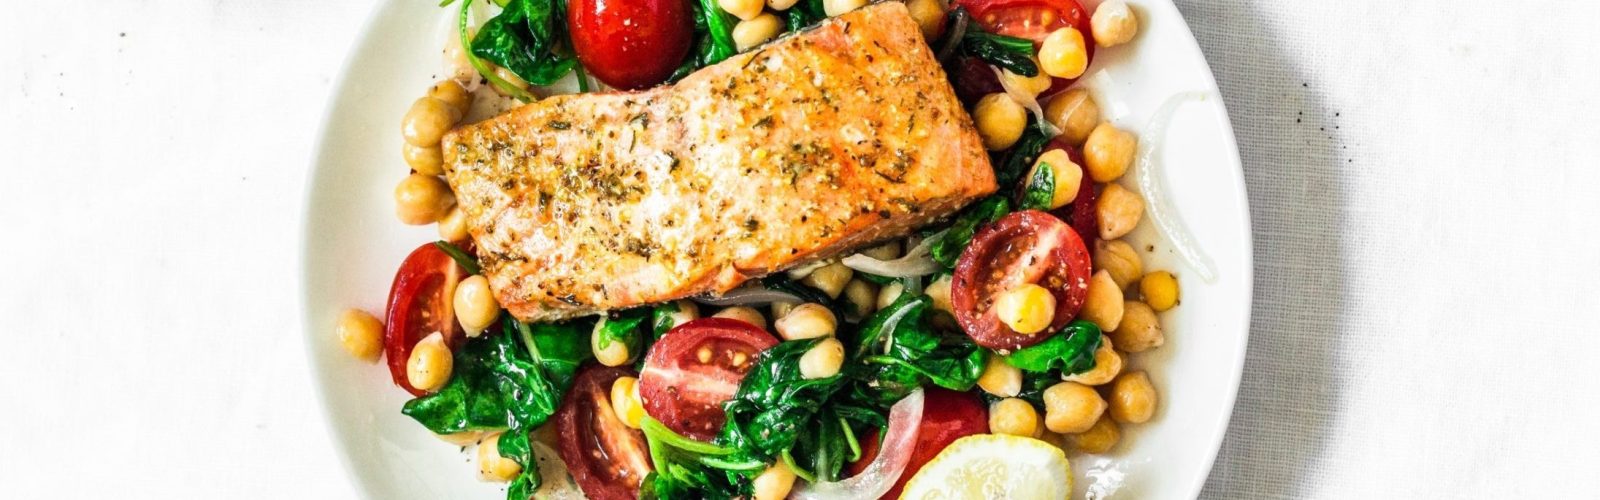 Warm chickpeas, cherry tomatoes, spinach salad with baked salmo